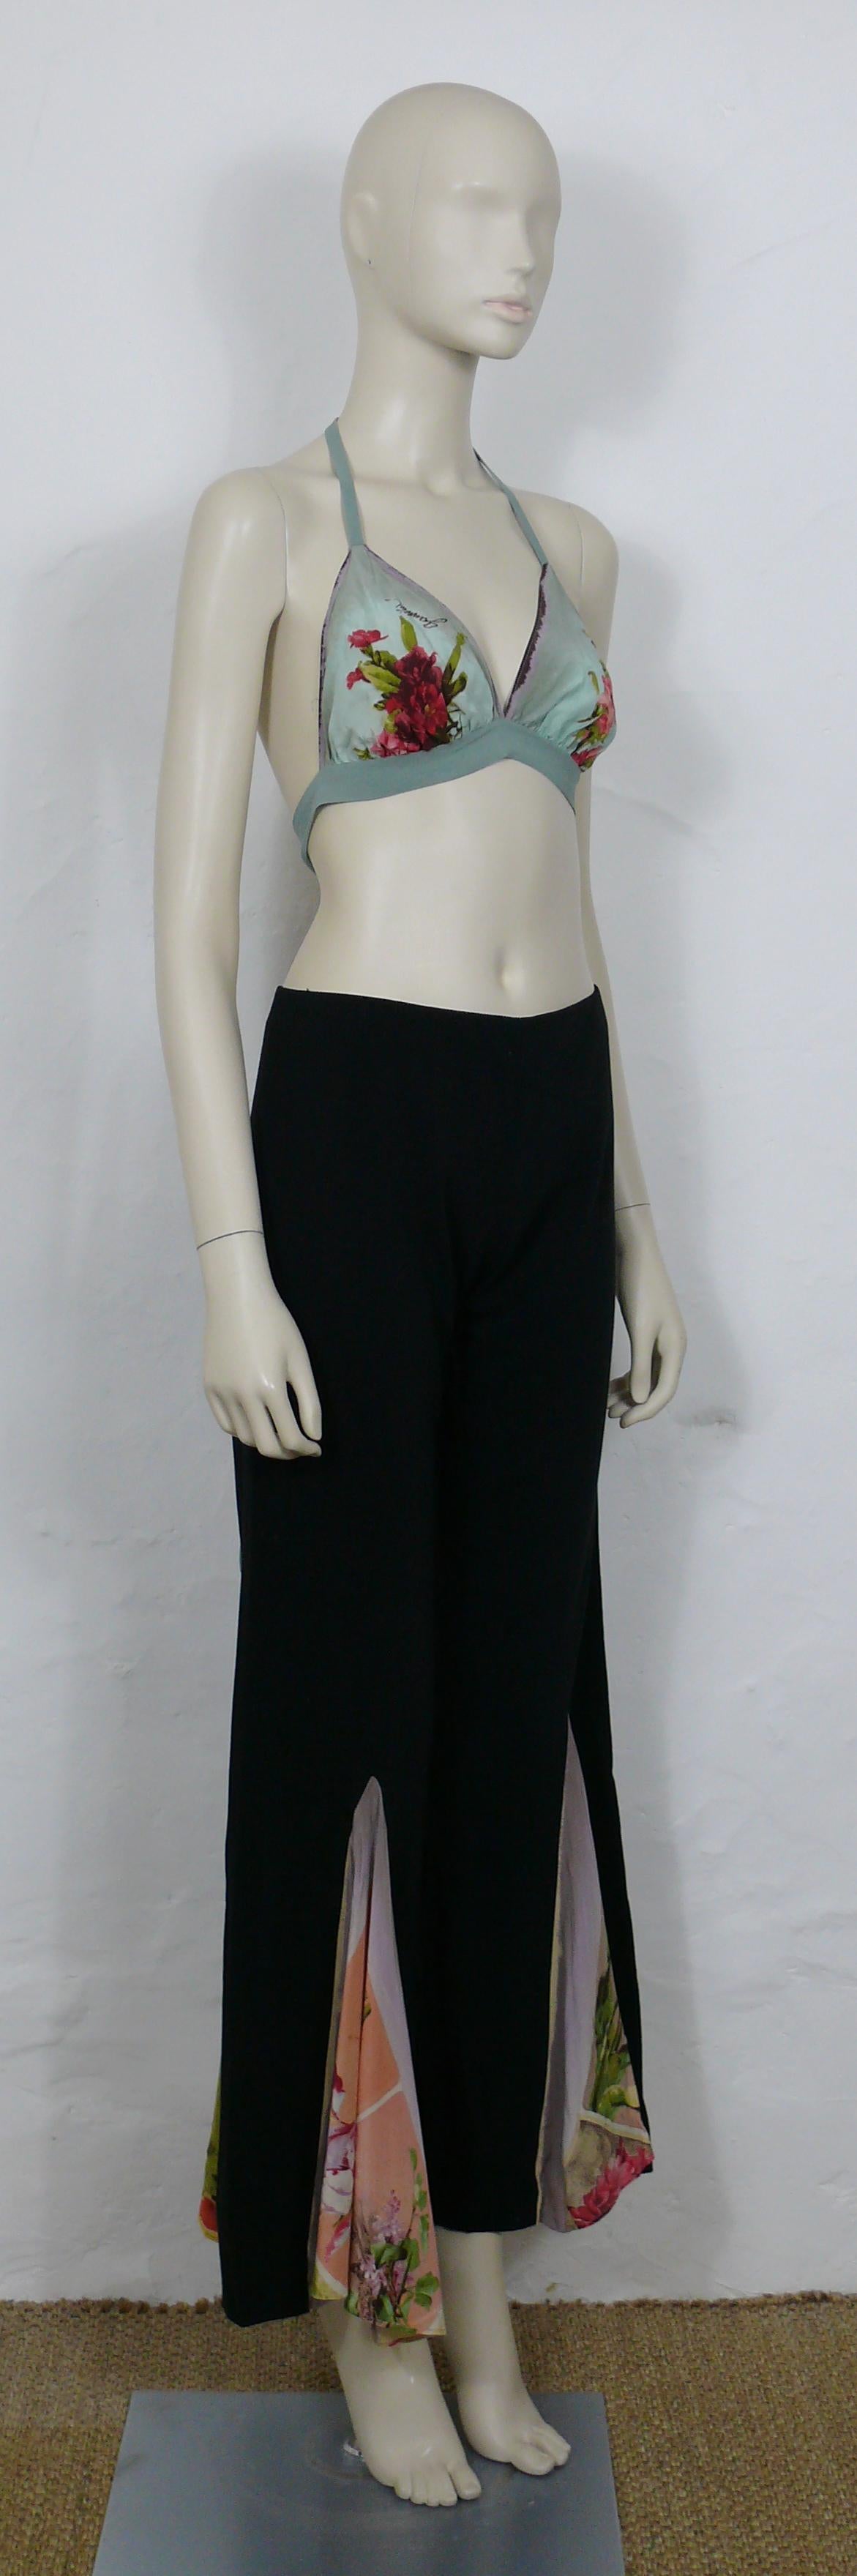 JEAN PAUL GAULTIER vintage black trousers and matching bra ensemble featuring a gorgeous floral print.

Label reads JEAN PAUL GAULTIER MAILLE FEMME.
Made in Italy.

Size labels read : I 40 / D 36 / F 36 / GB 8 / USA 6.
Please refer to